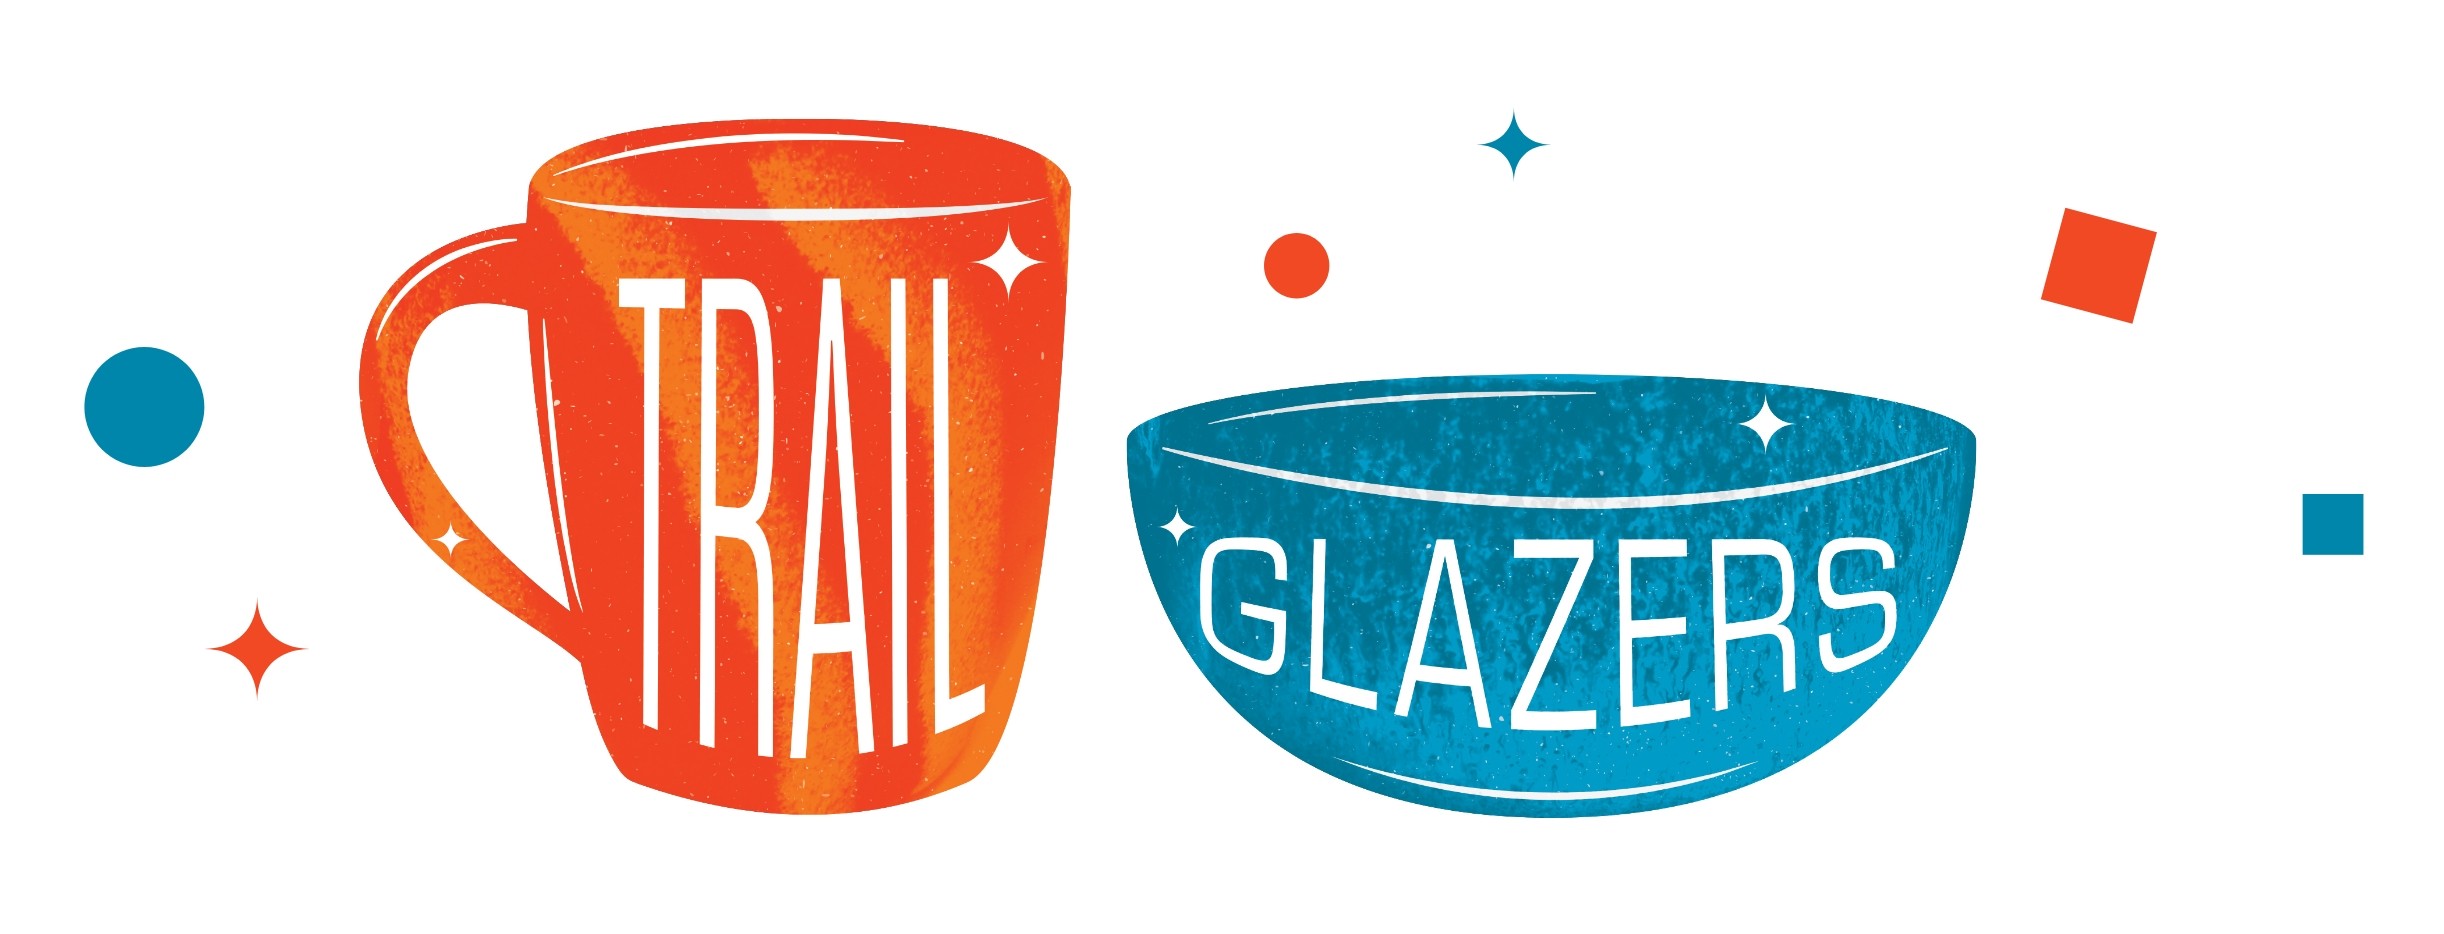 Illustration of an orange mug printed with "trail" and a blue bowl printed with "glazers."